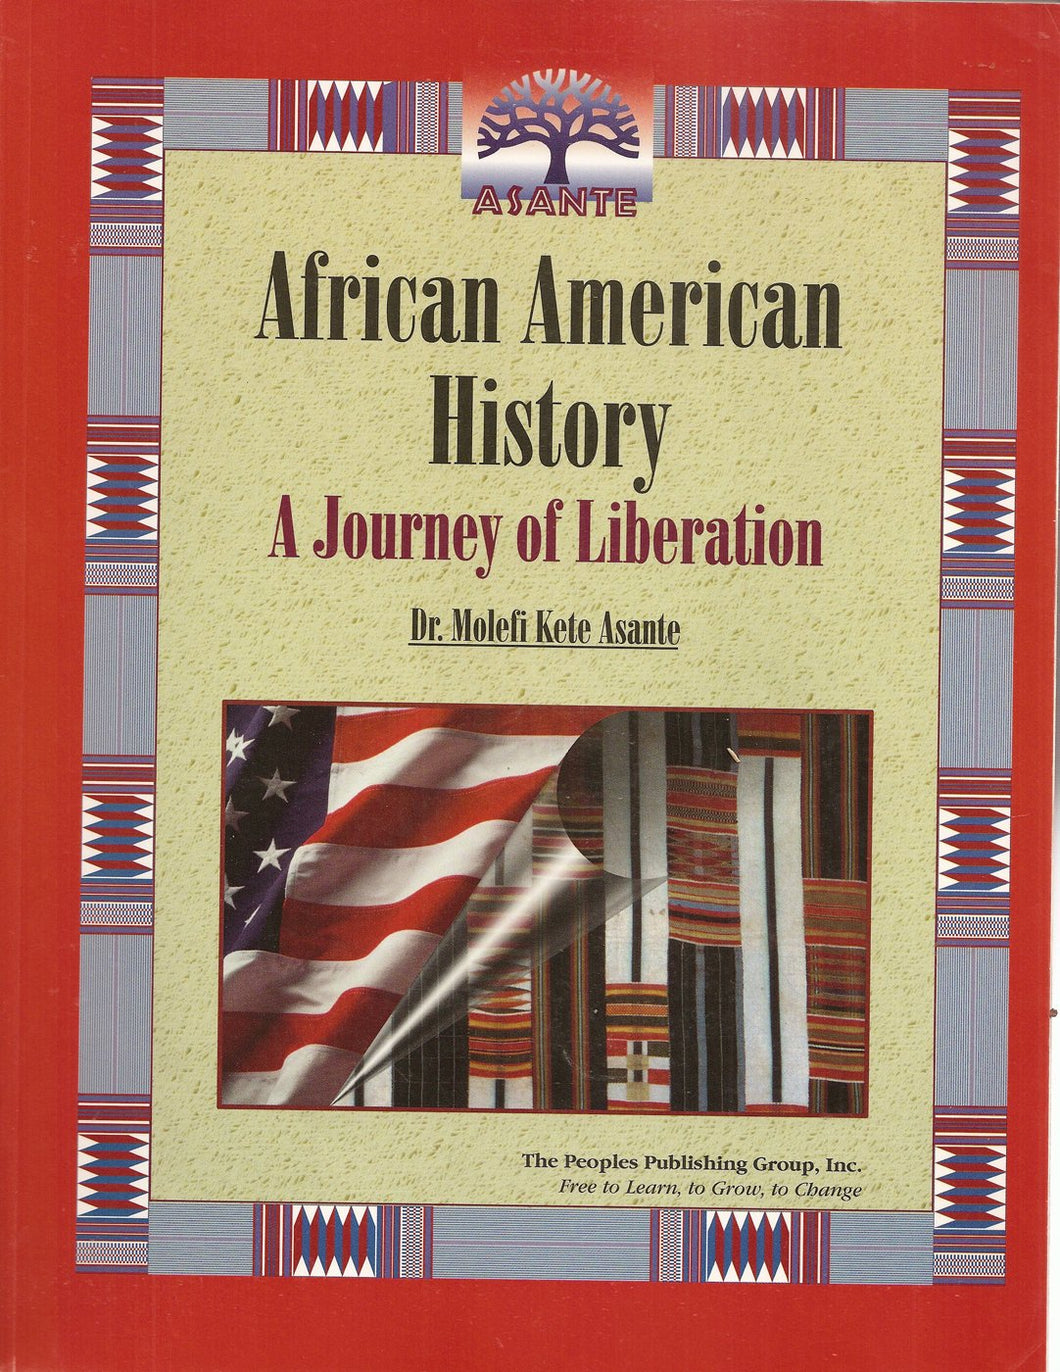 AFRICAN AMERICAN HISTORY: A JOURNEY OF LIBERATION